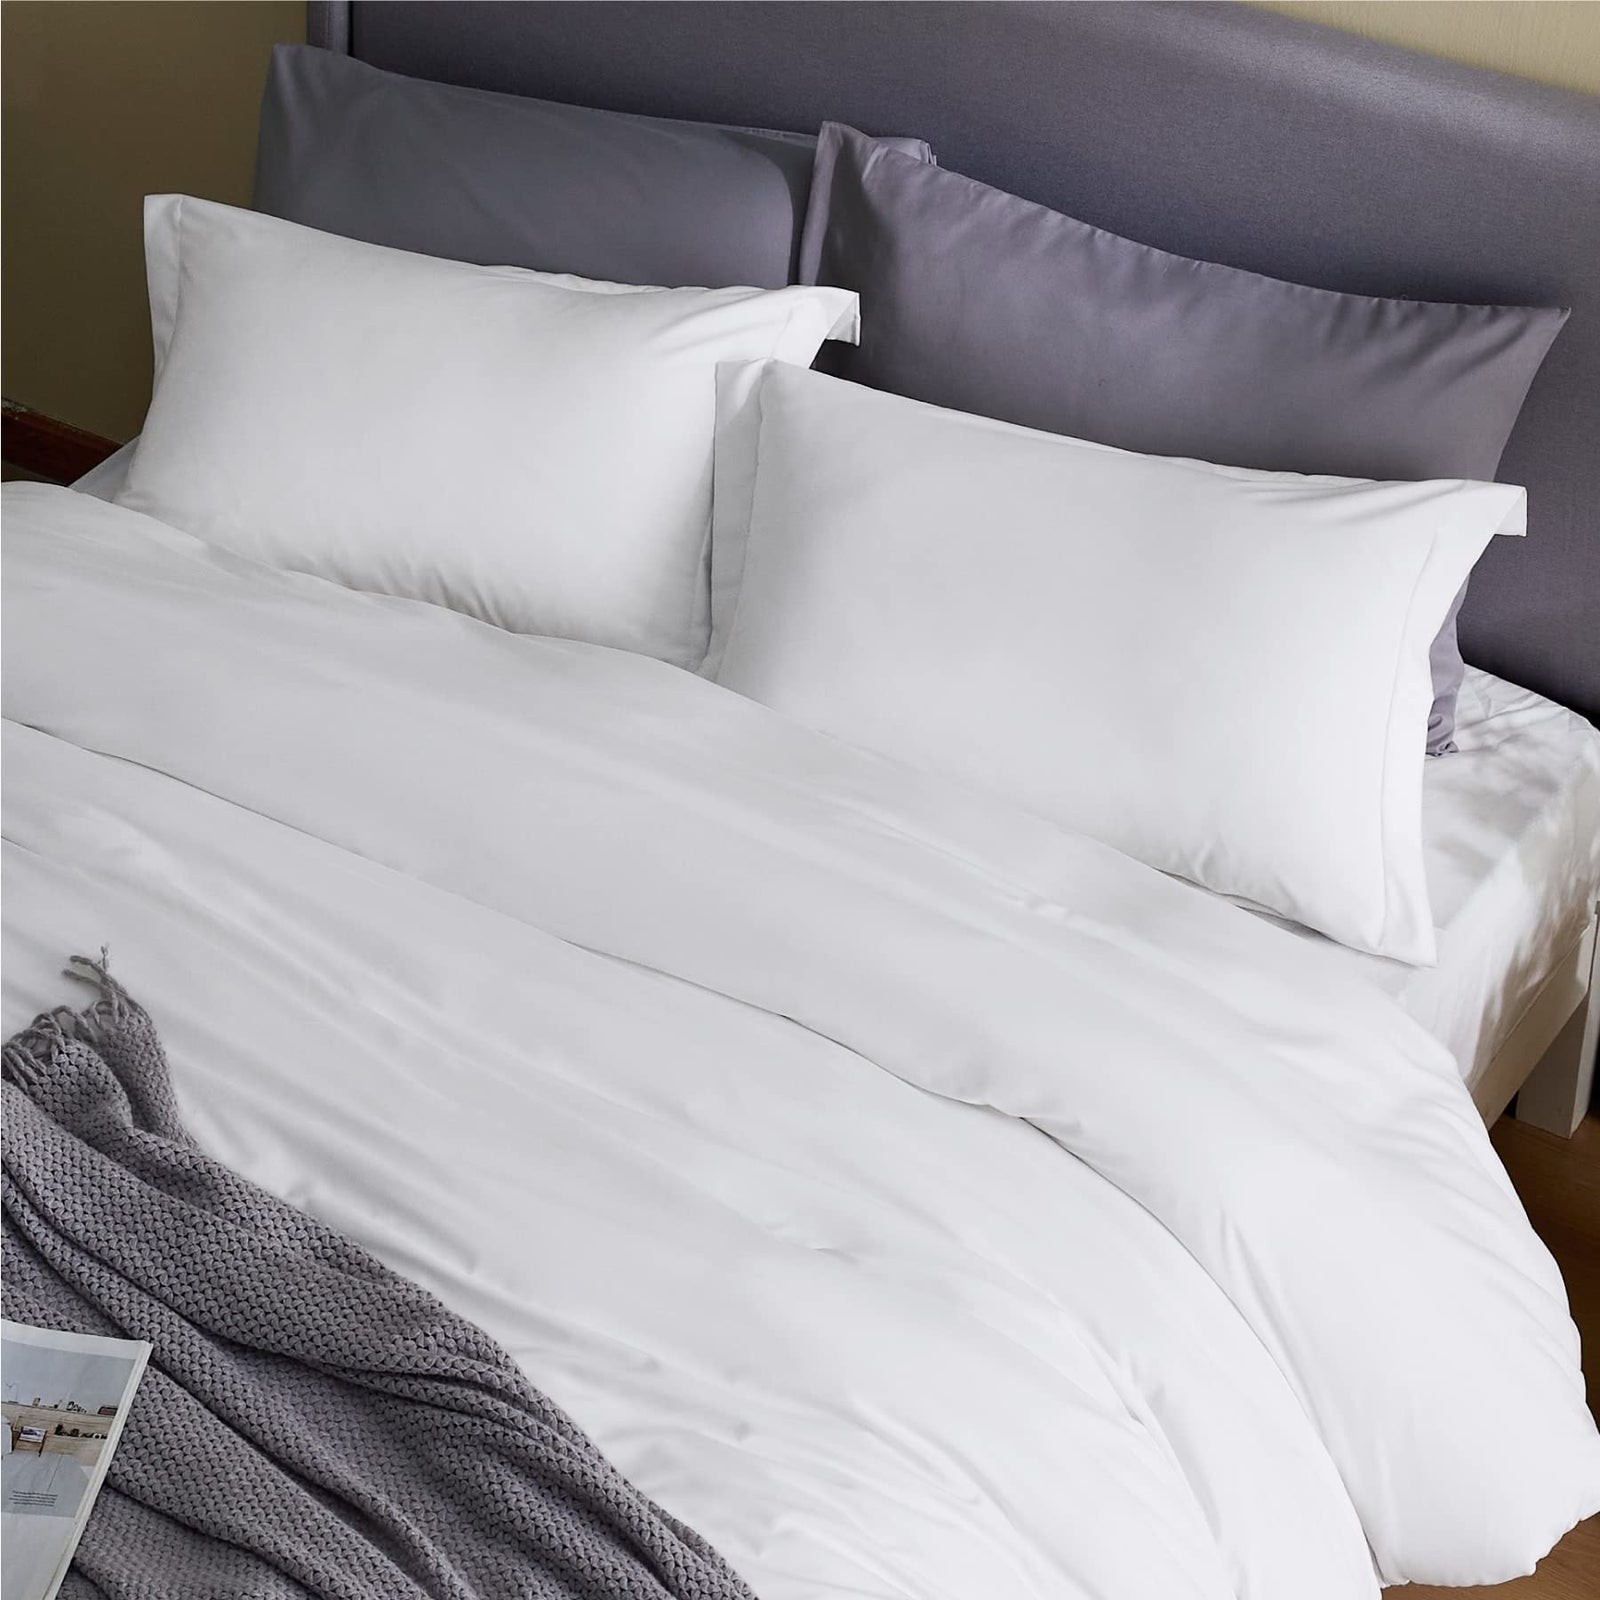 Bedsure White Duvet Covers Queen Size - Brushed Microfiber Soft Queen Duvet Cover Set 3 Pieces with Zipper Closure, 1 Duvet Cover 90x90 inches and 2 Pillow Shams